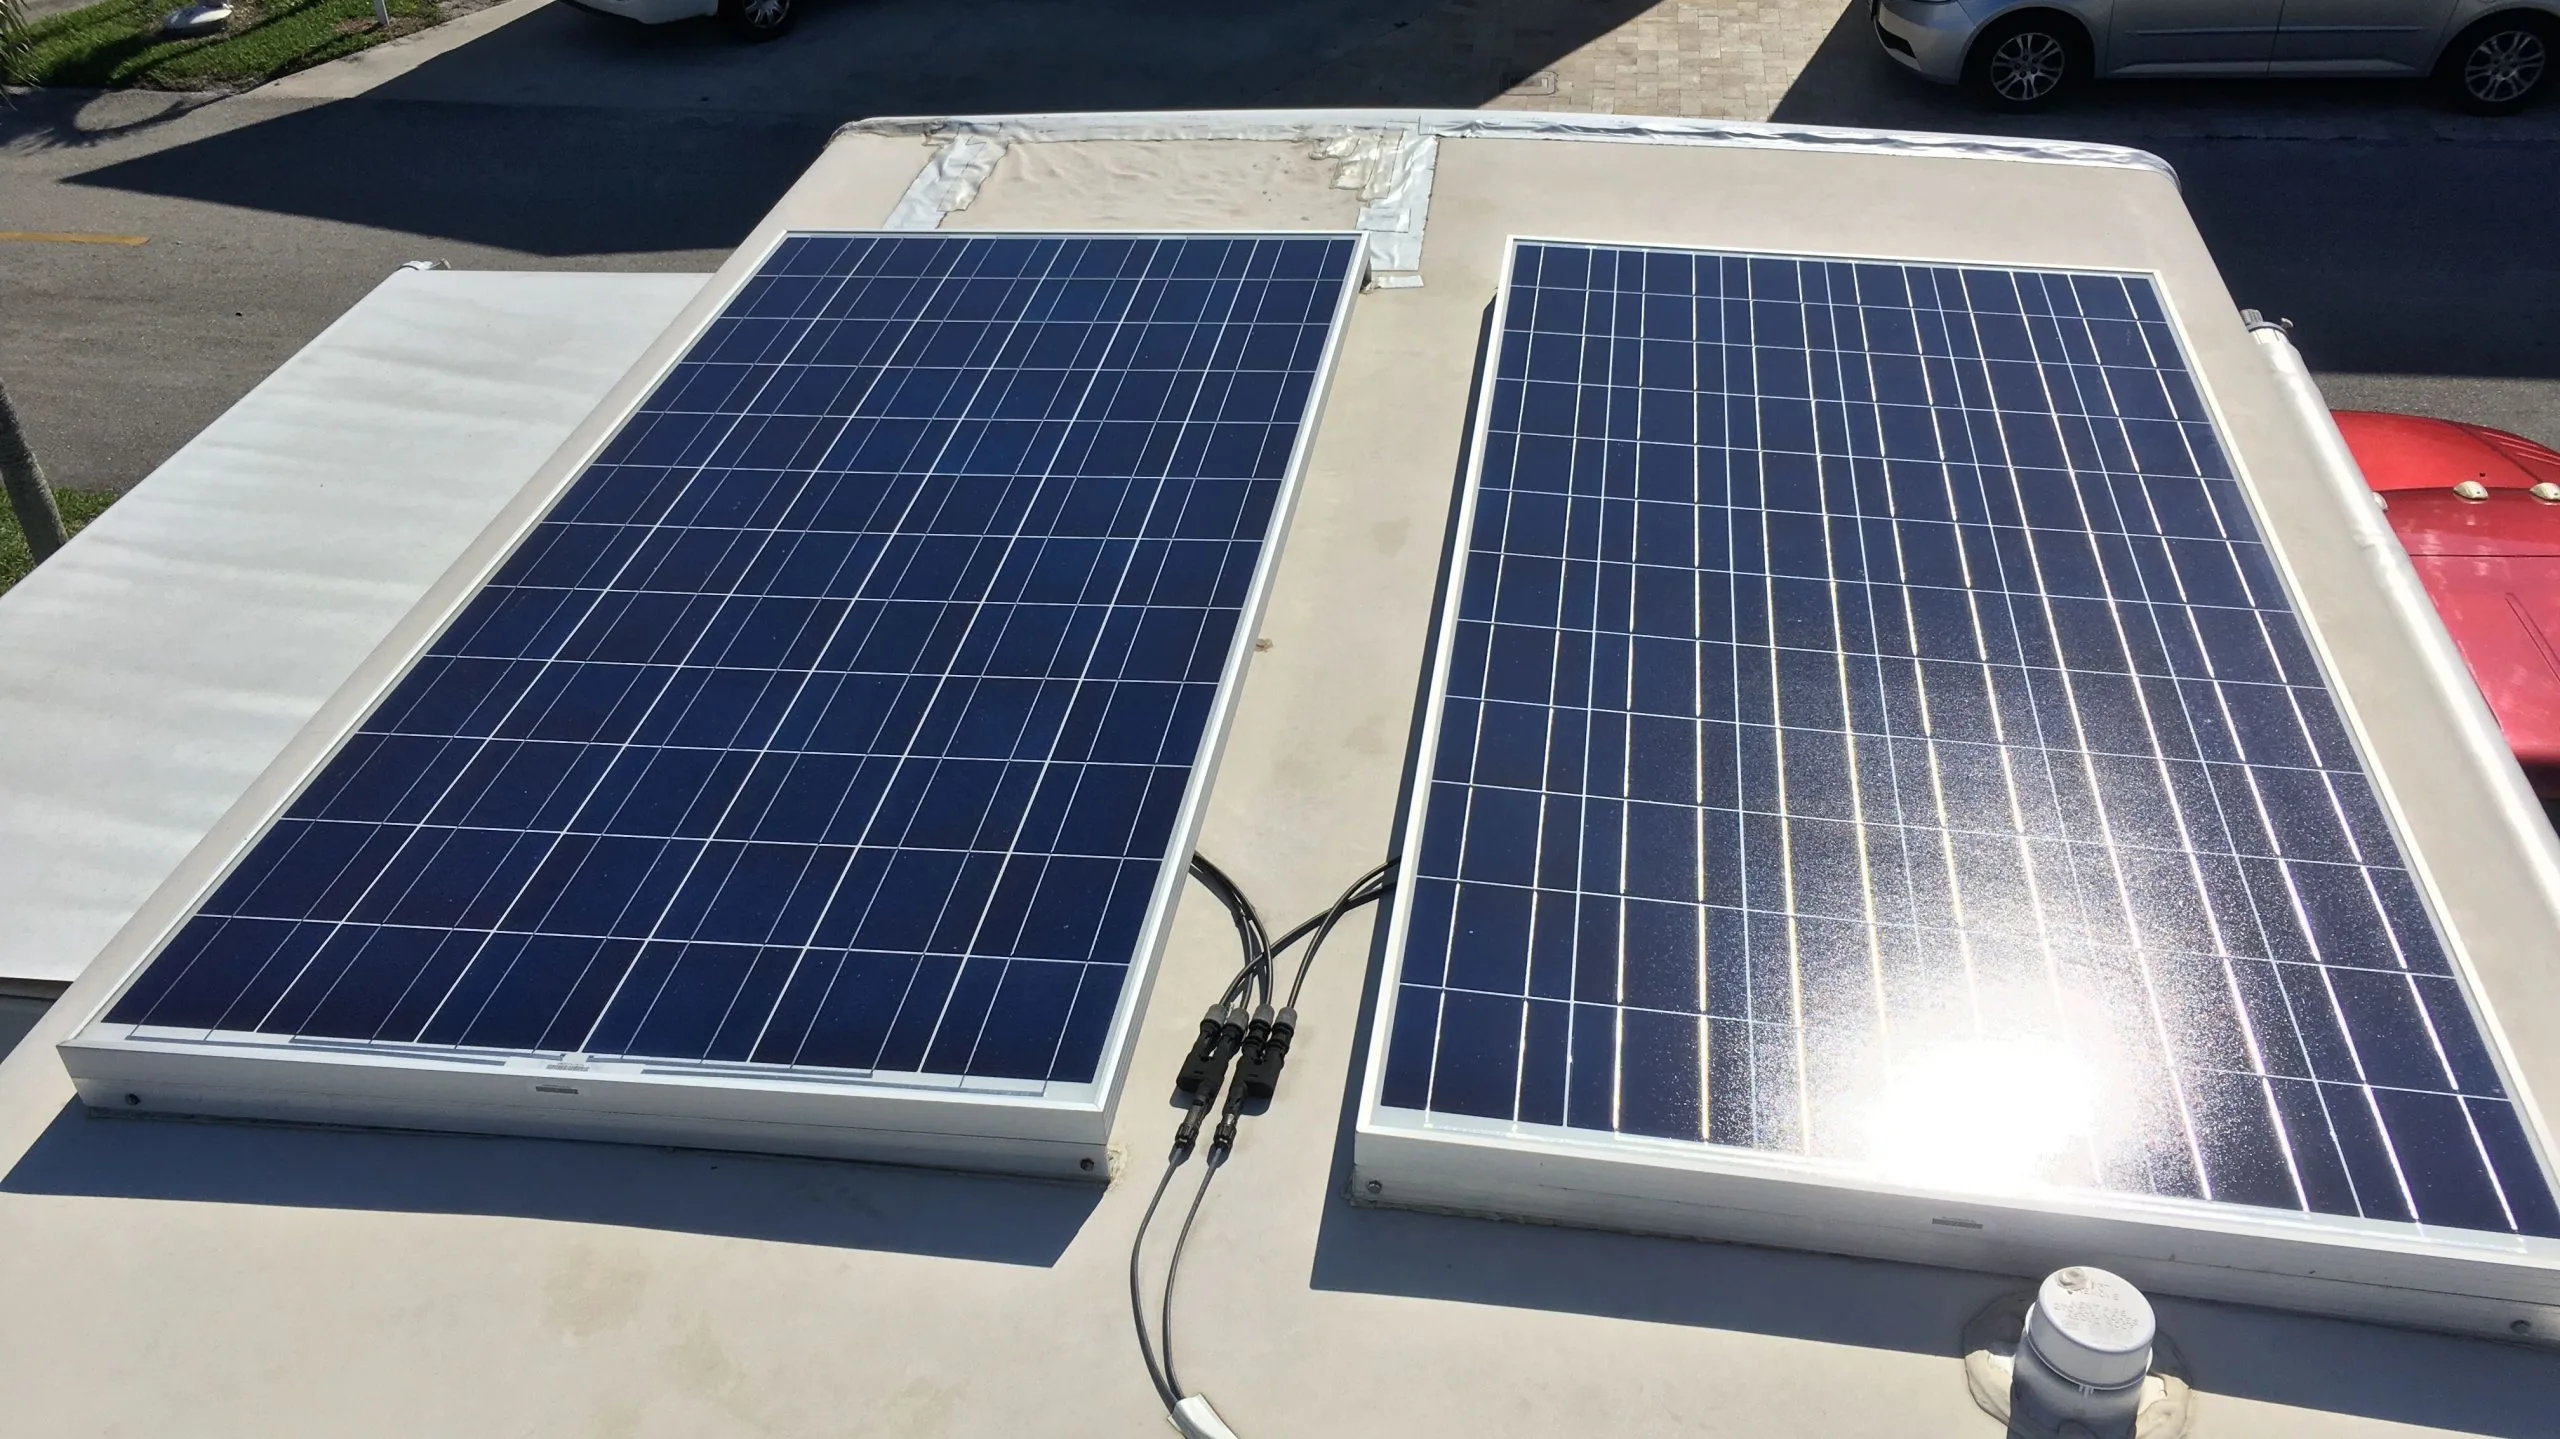 How much solar do you need for your RV roof